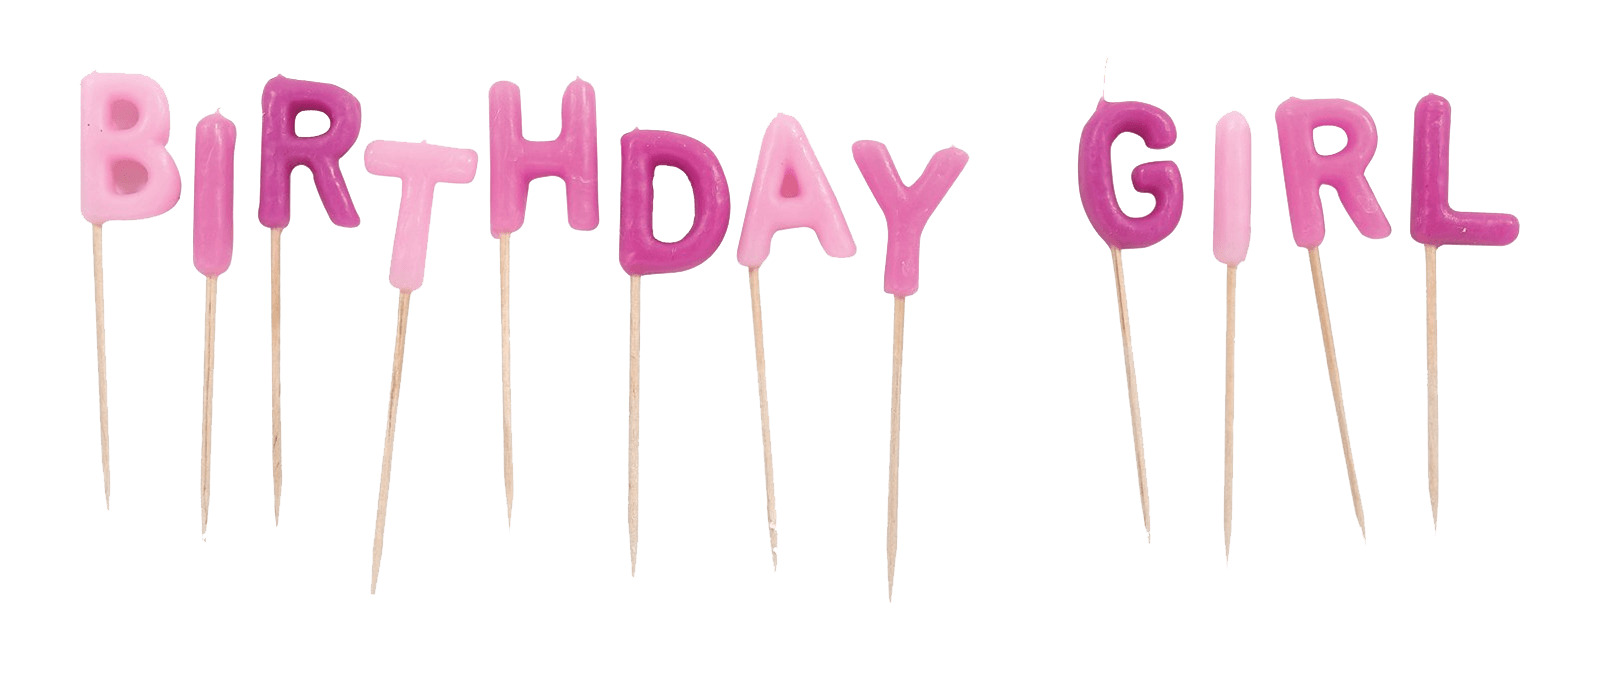 Birthday Girl Candles icons